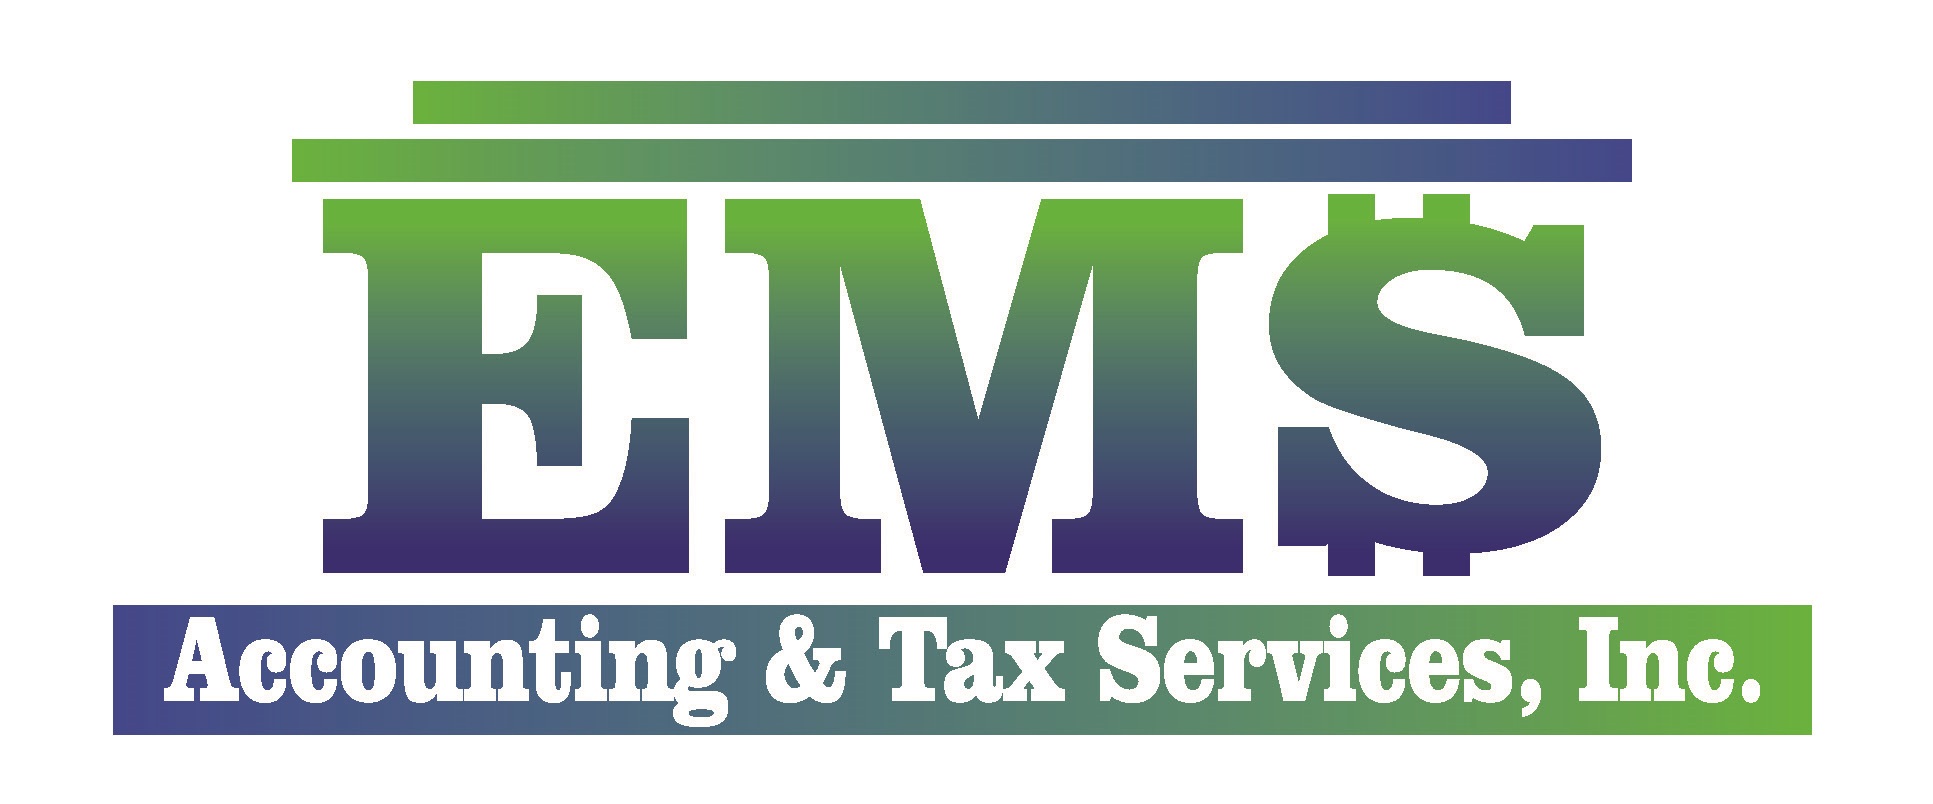 EMS Accounting & Tax Services, Inc. Photo